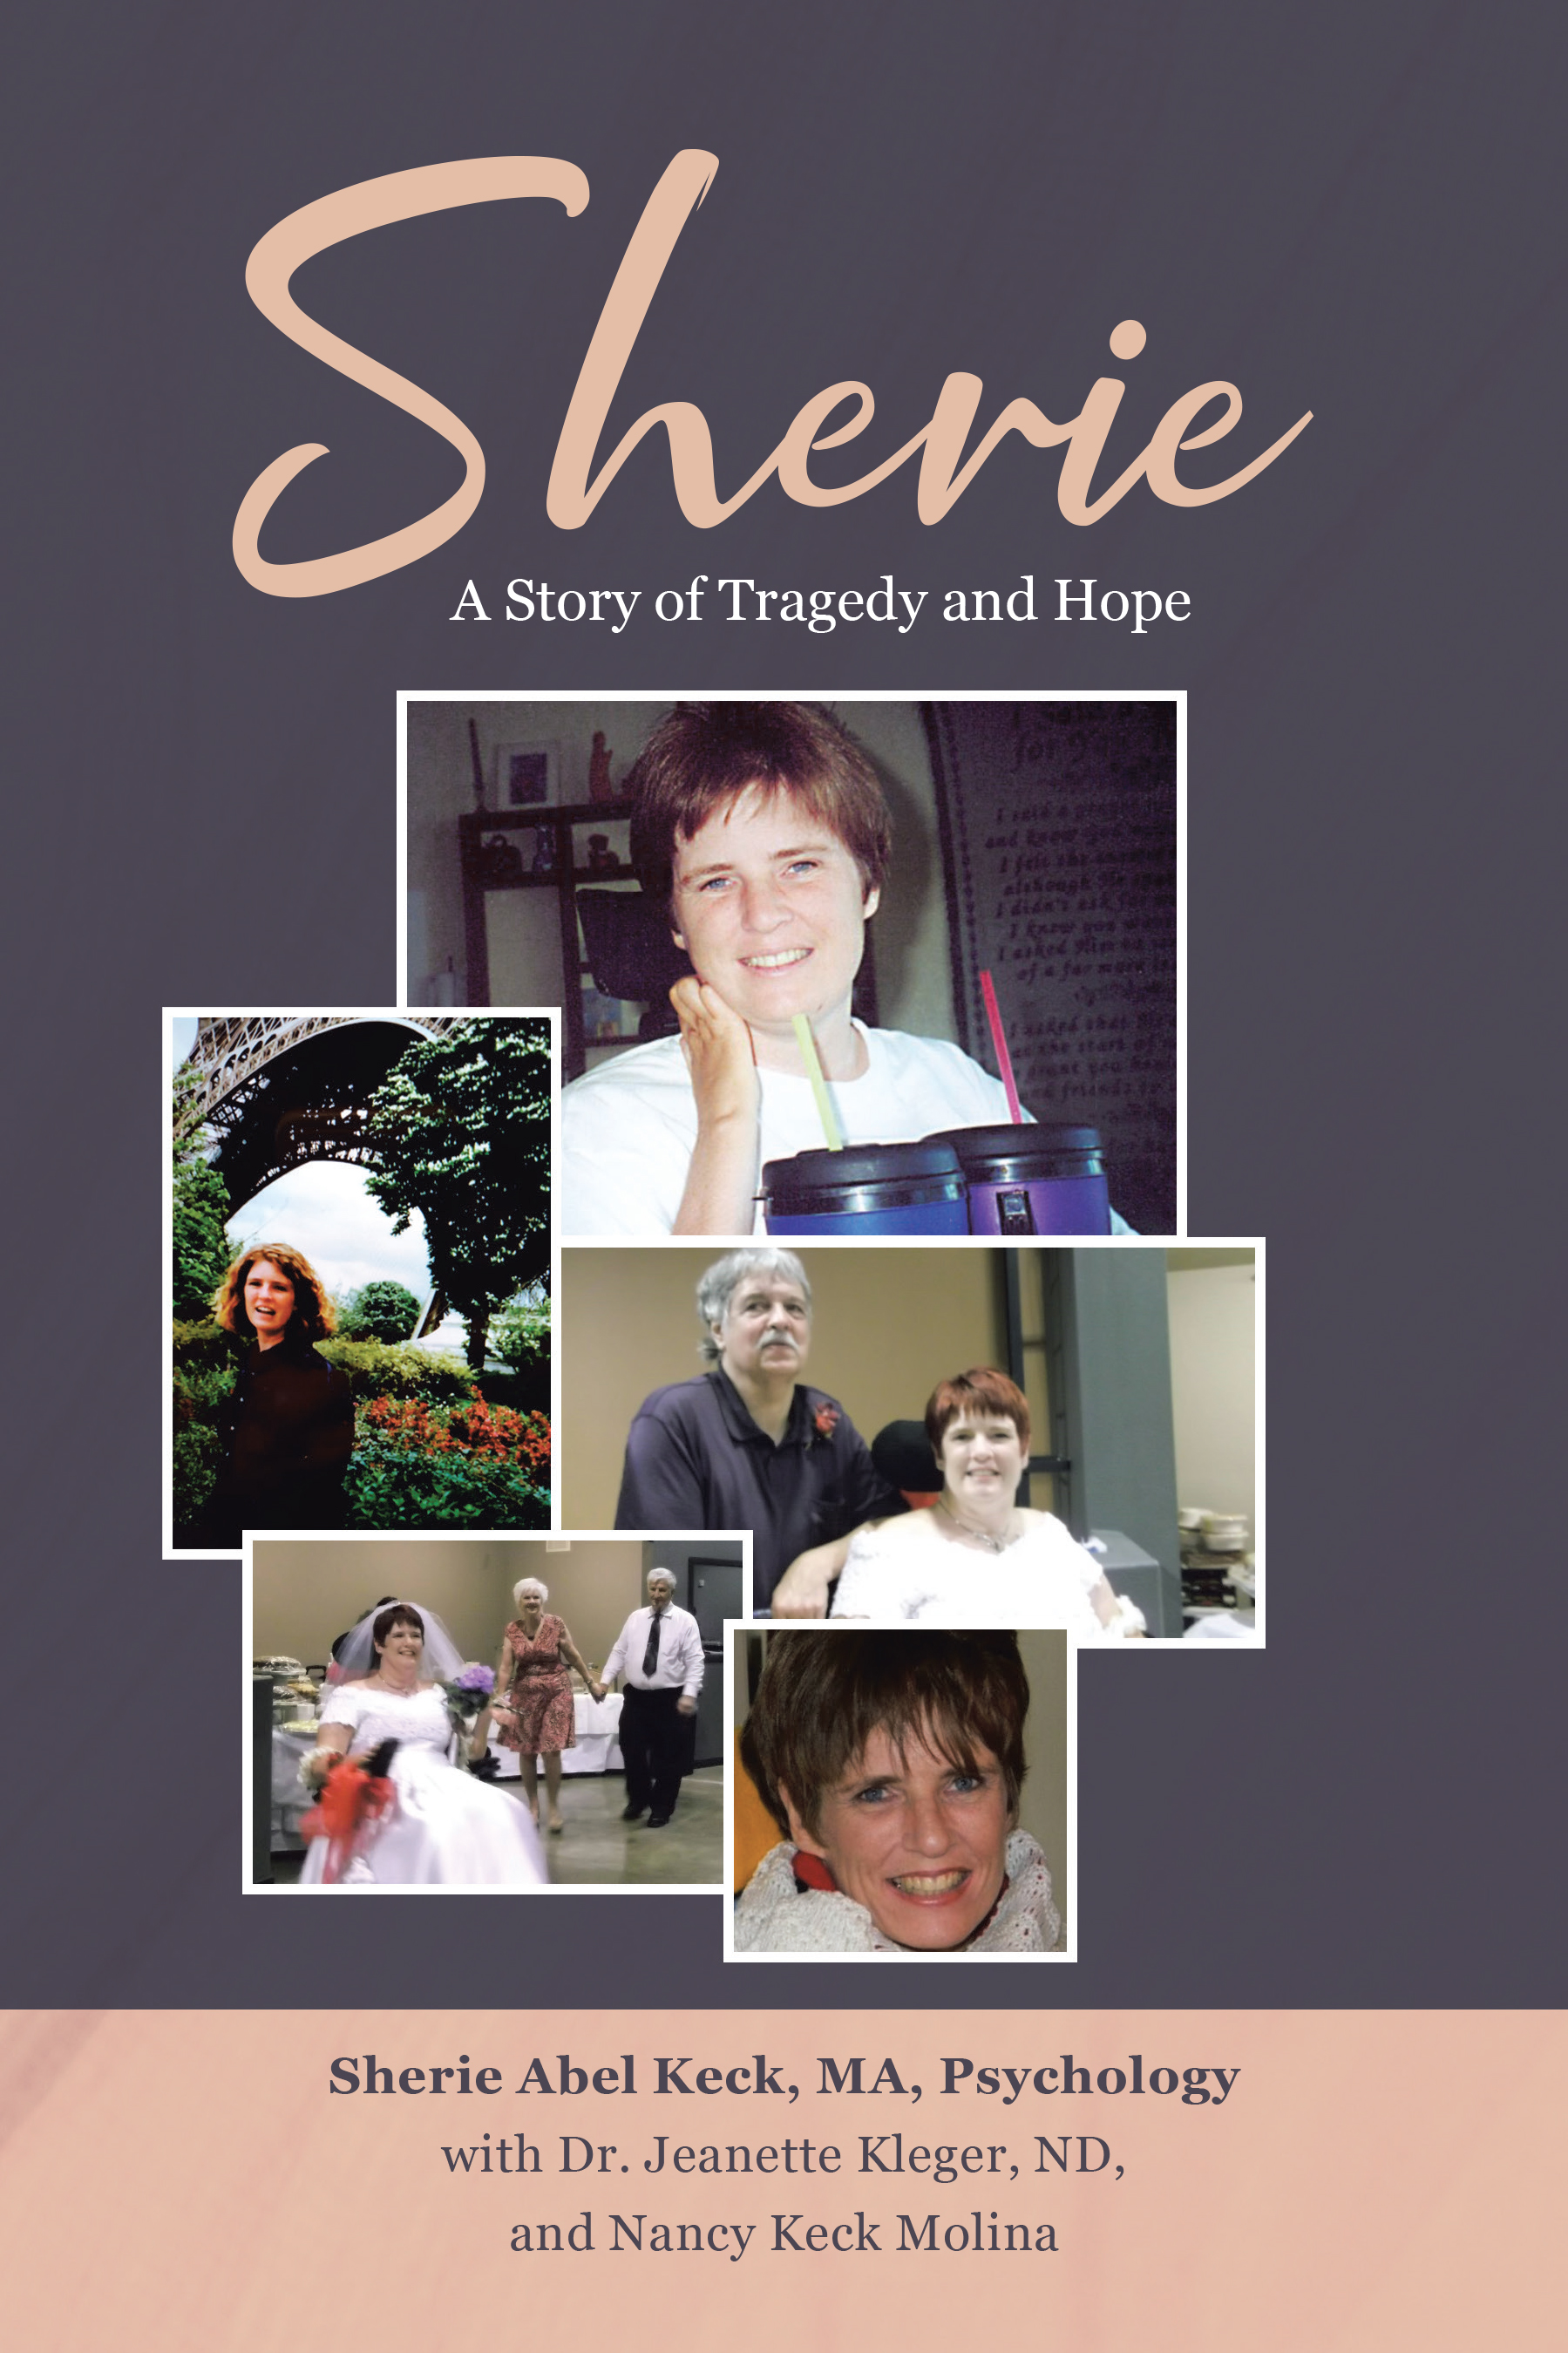 Author Sherie Abel Keck, MA, Psychology with Dr. Jeanette Kleger, ND, and Nancy Keck Molina’s New Book, “Sherie: A Story of Tragedy and Hope,” is Released